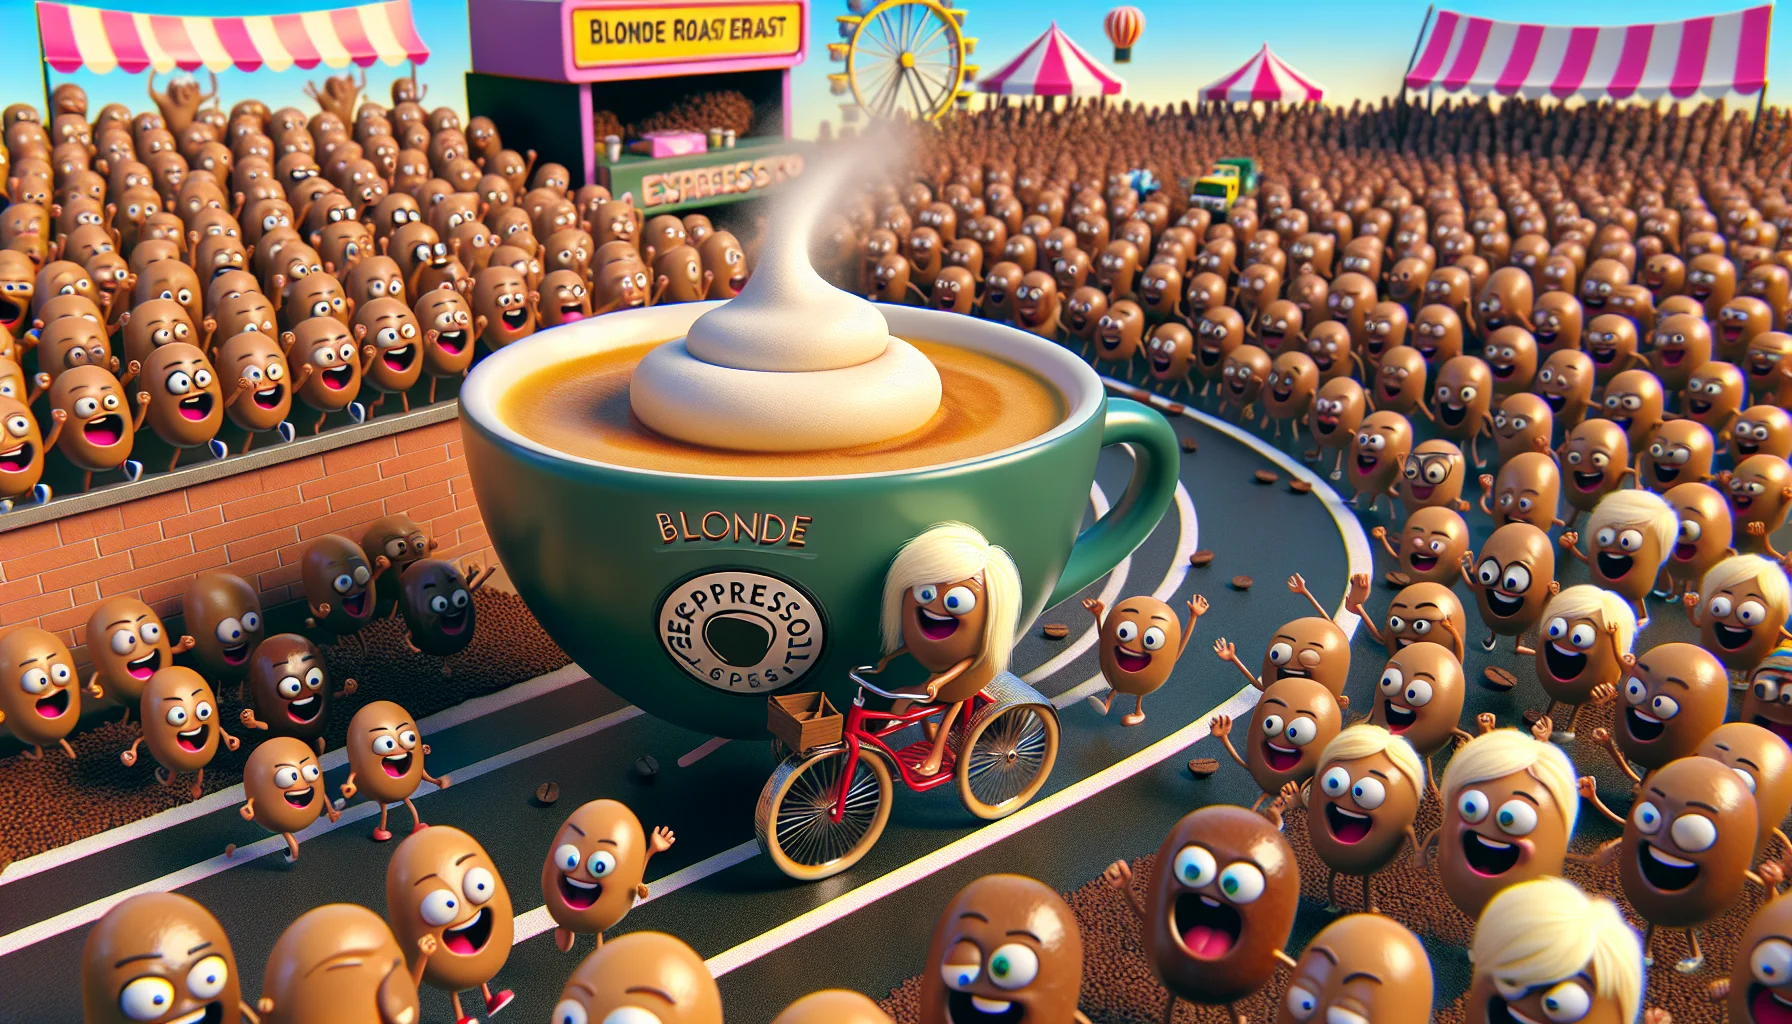 Imagine a humorous yet convincing scene that showcases a blonde espresso roast. A large, steaming coffee cup perched on a tiny tricycle is wheeling itself through an energetic crowd of coffee beans cheering it on. All the coffee beans are varying shades of brown, symbolizing the different roasts, and they have cute cartoon faces showing a mix of excitement, awe, and surprise. They're holding mini signs cheering for the blonde roast espresso. In the background, a carnival atmosphere prevails with tiny fairground attractions such as a Ferris wheel and food stalls to keep up the joyous energy.